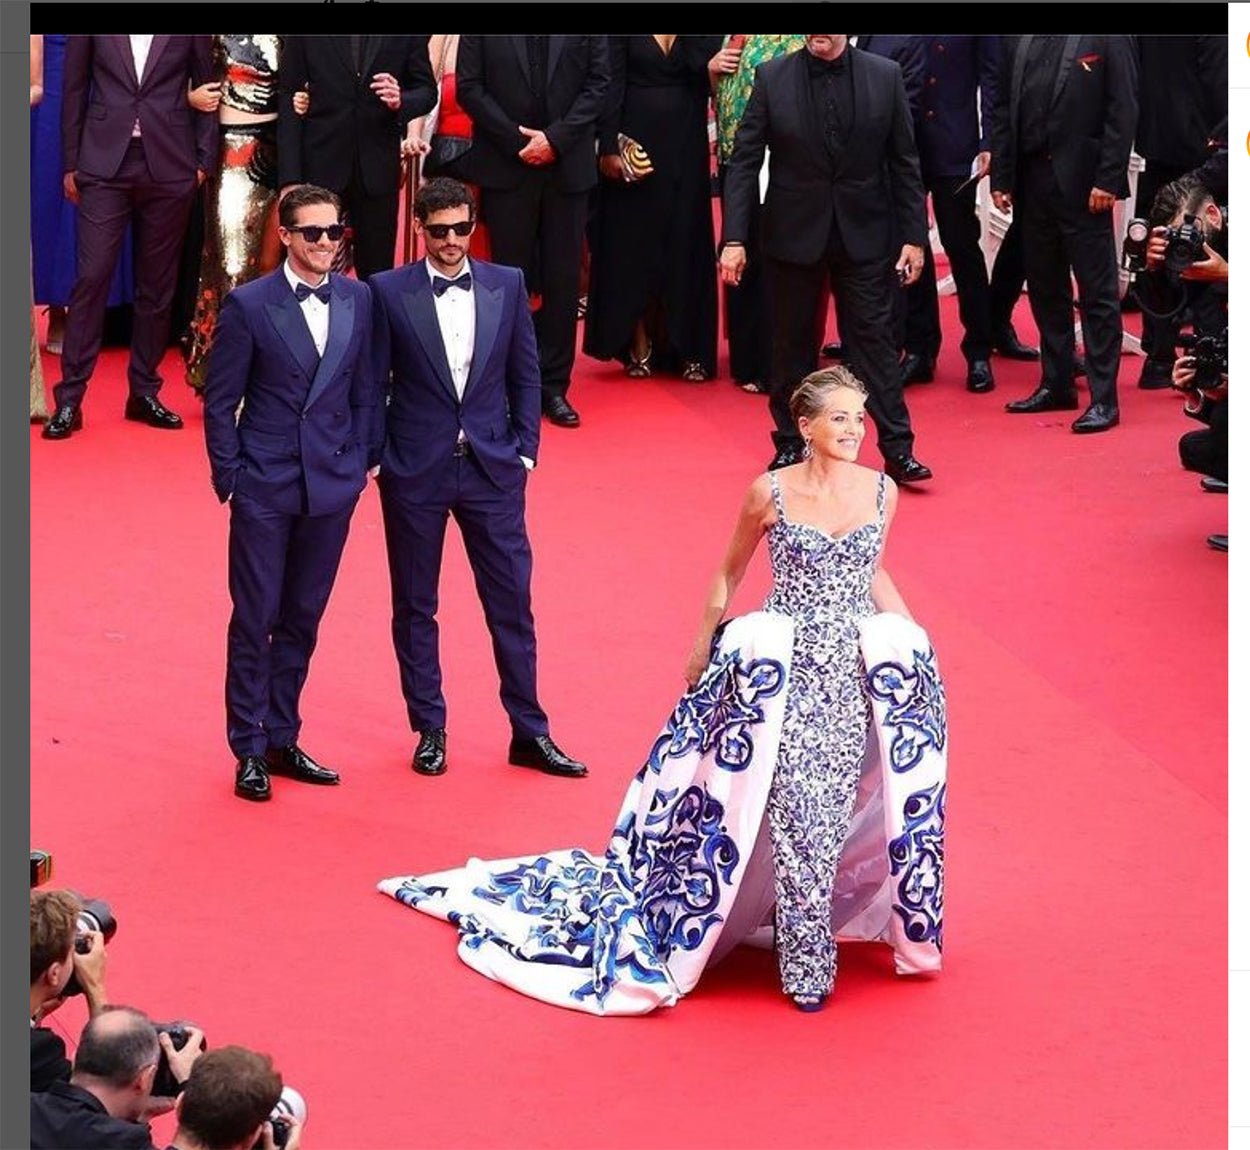 Sharon Stone Caused A Sensation At Cannes In A Dolce & Gabbana Gown - DSF Antique Jewelry